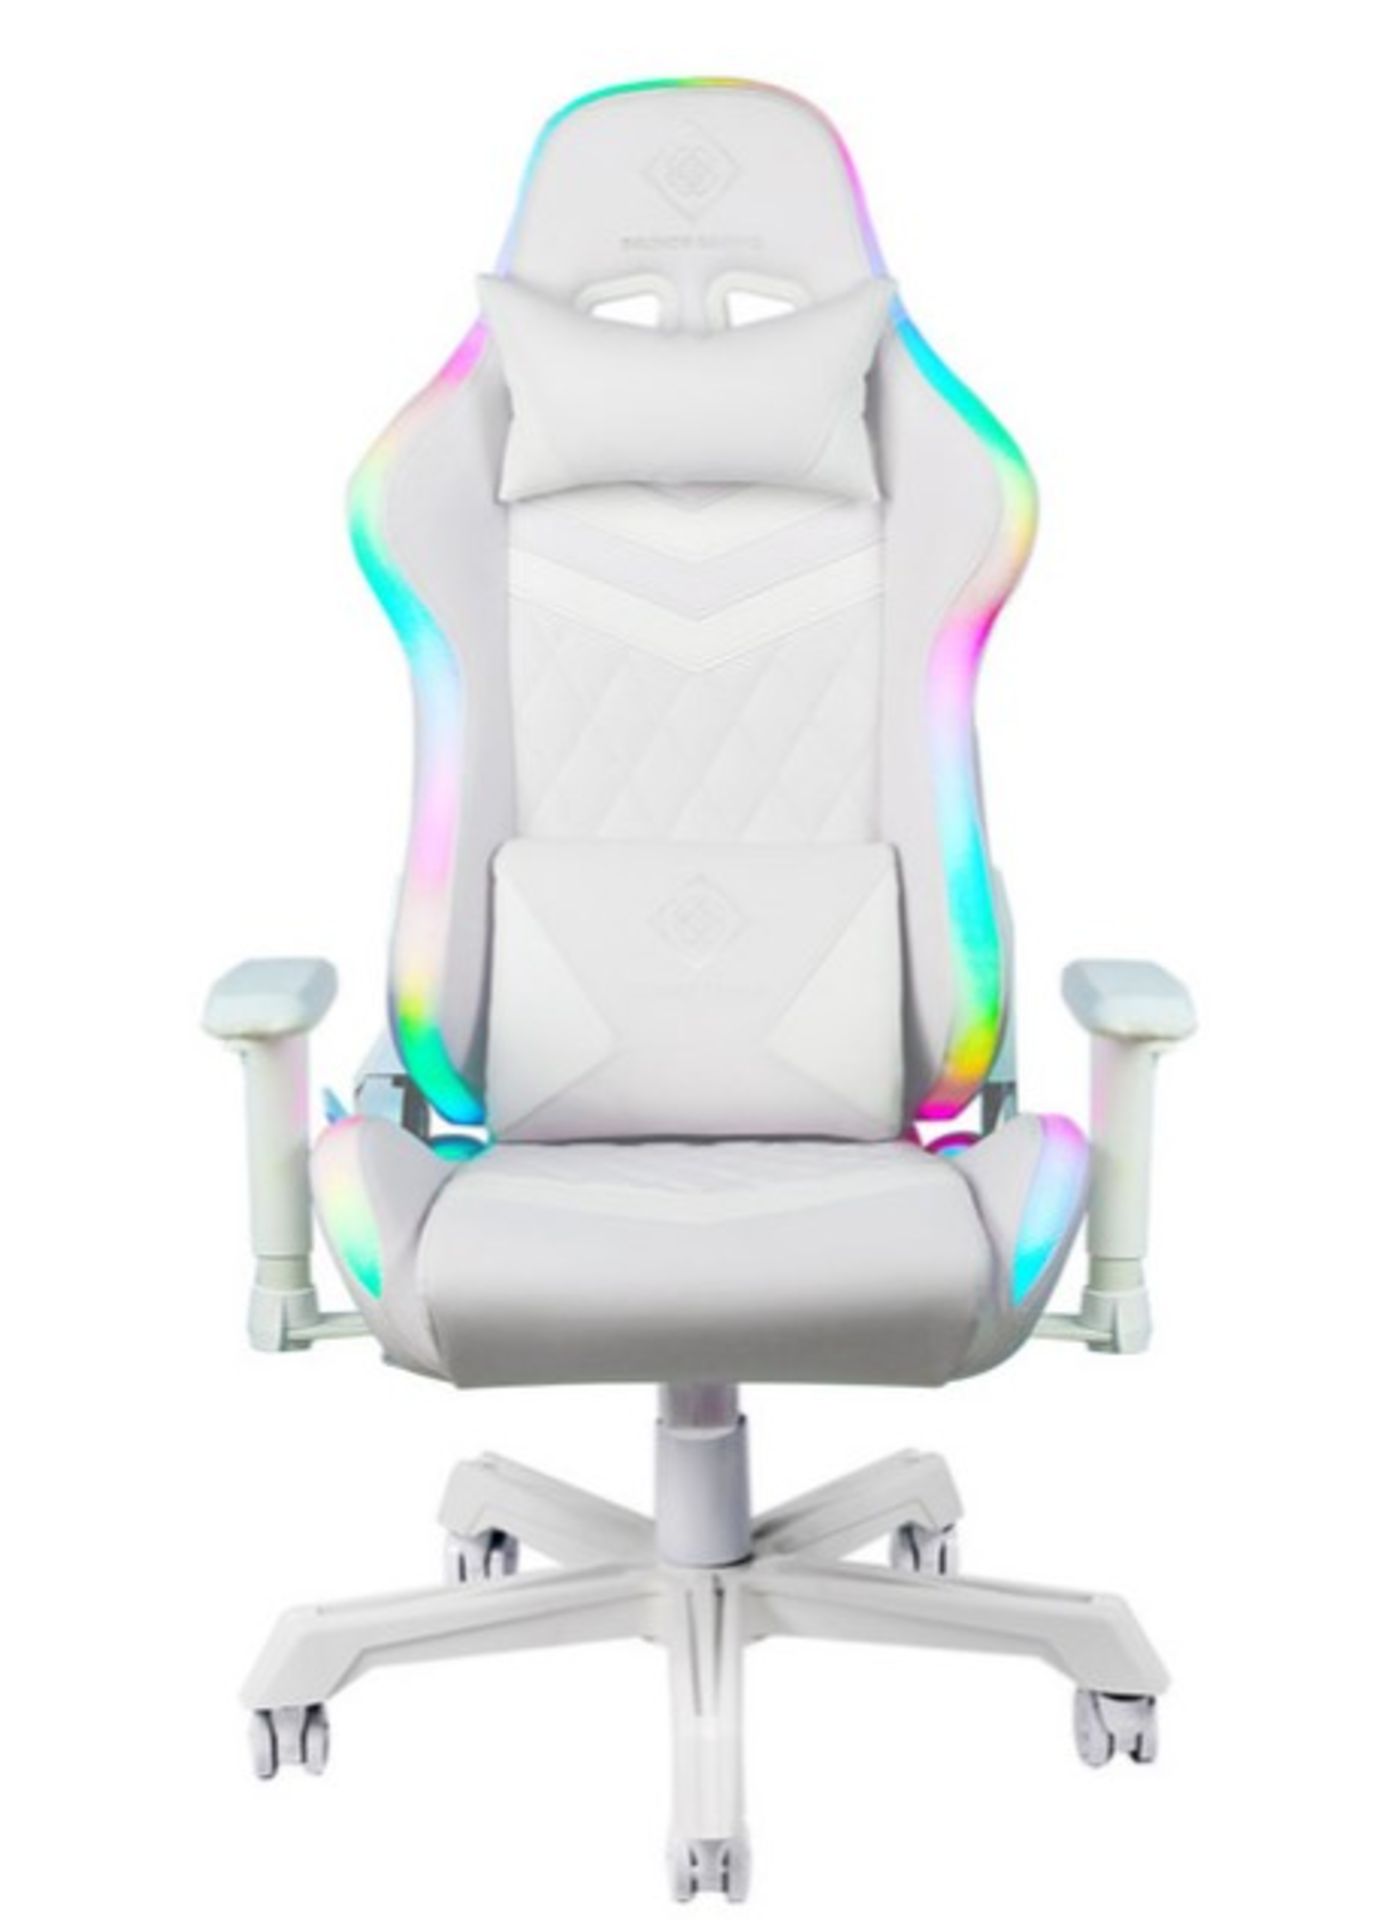 Title: (8/P) RRP £259Deltaco RGB Ergonomic Gaming Chair White332 Colour ModesWipe Clean - Image 6 of 14